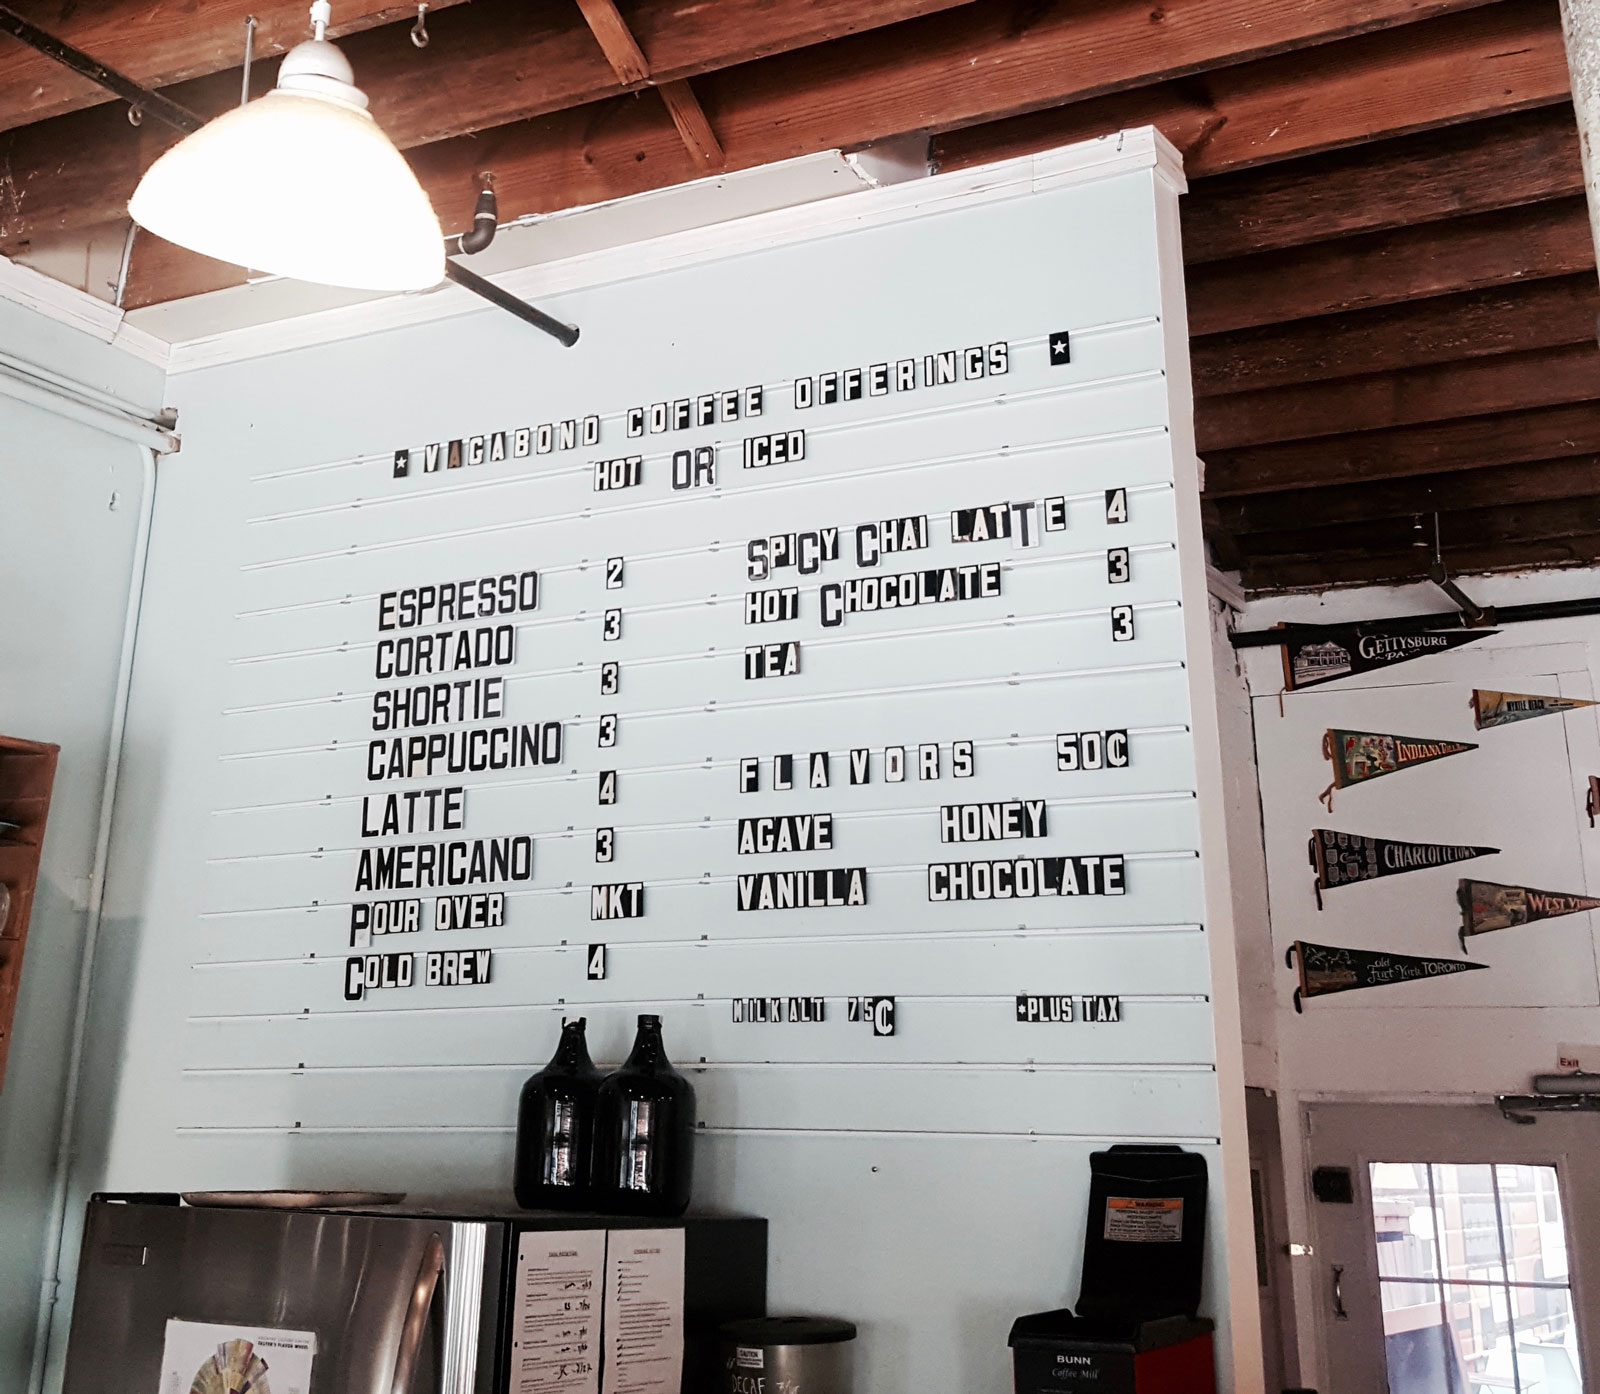 The menu for Vagabond Coffee in Jacksonville